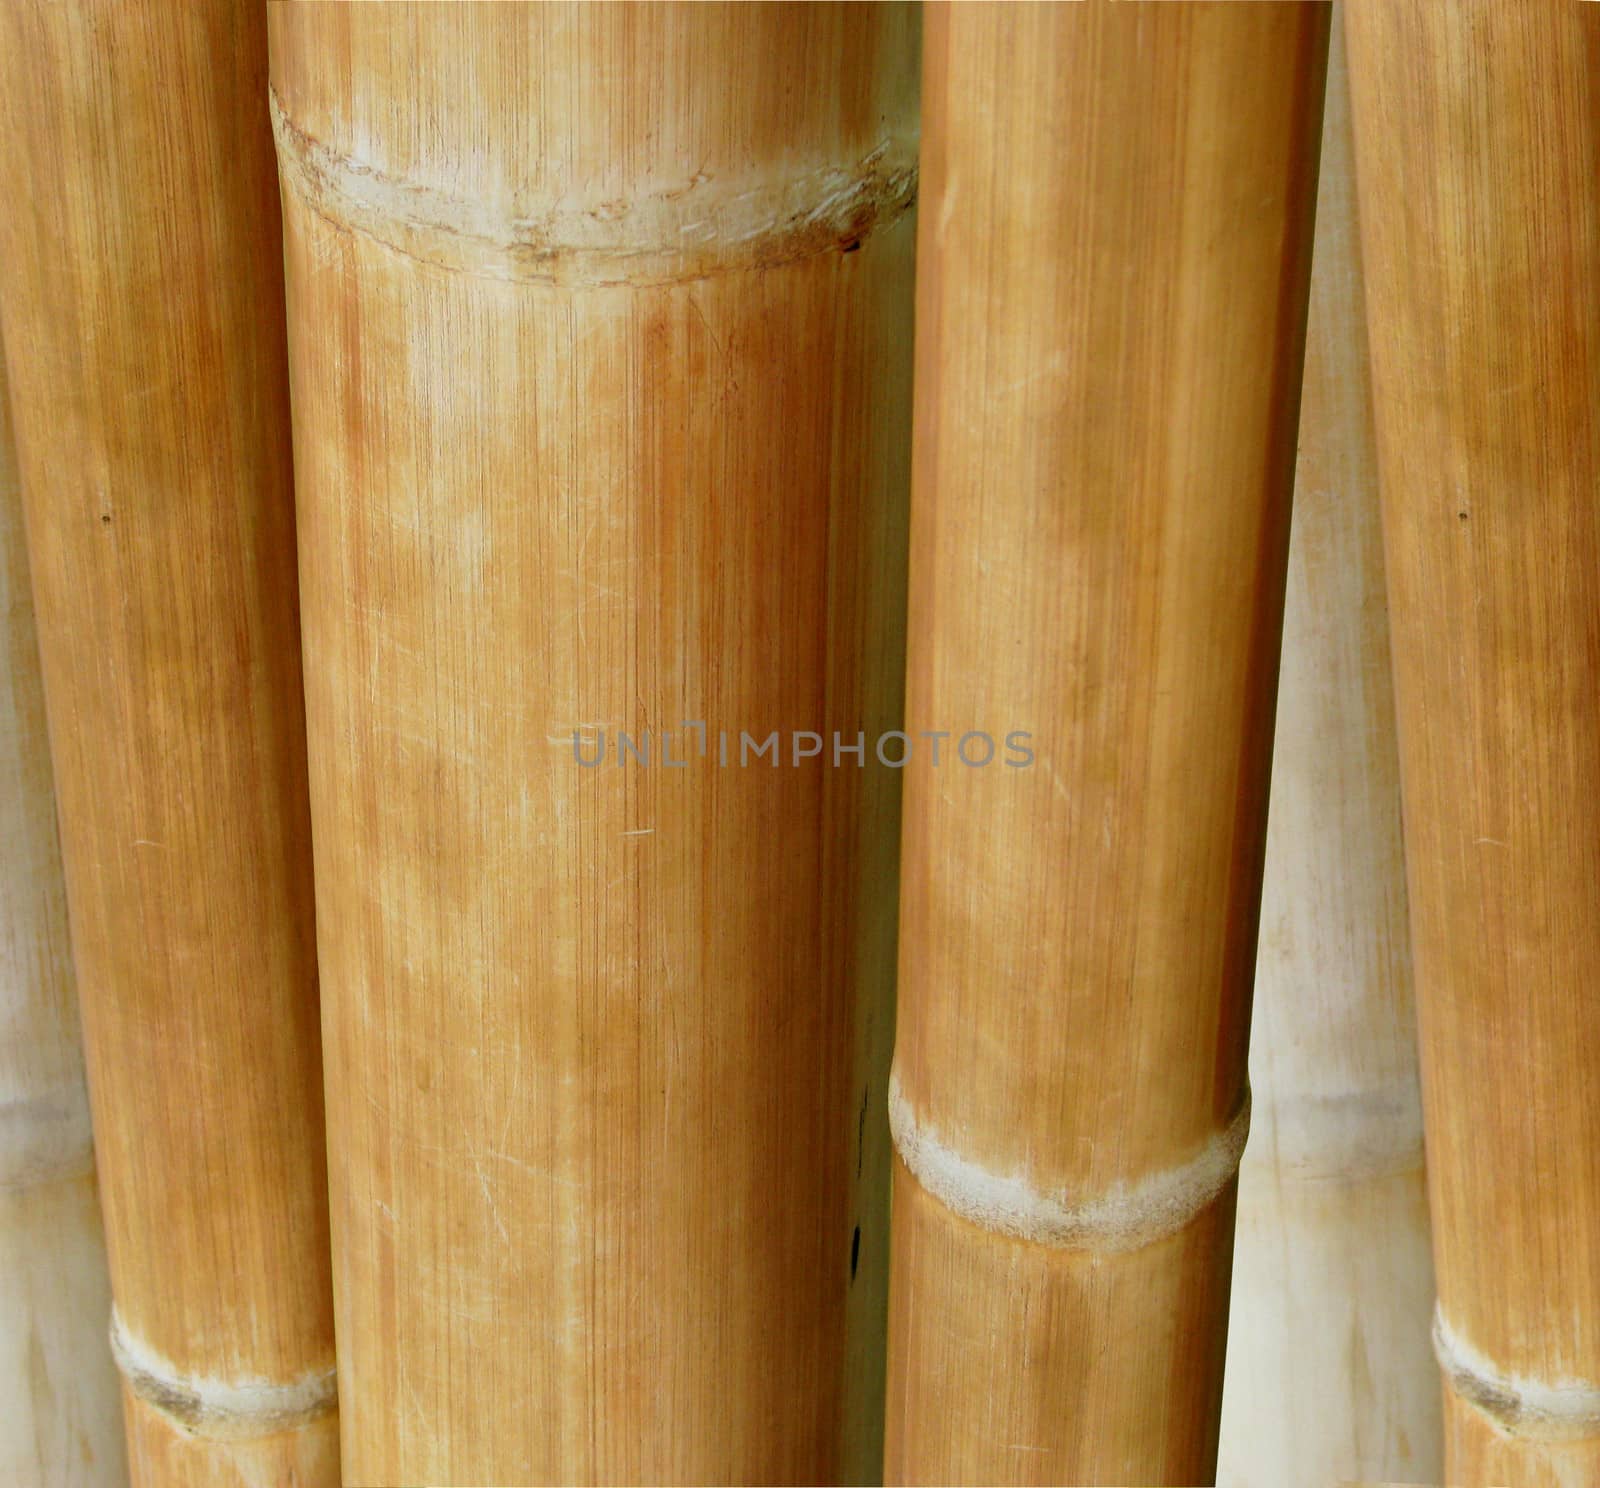 Abstract Background Texture Of Thick Sticks Of Bamboo